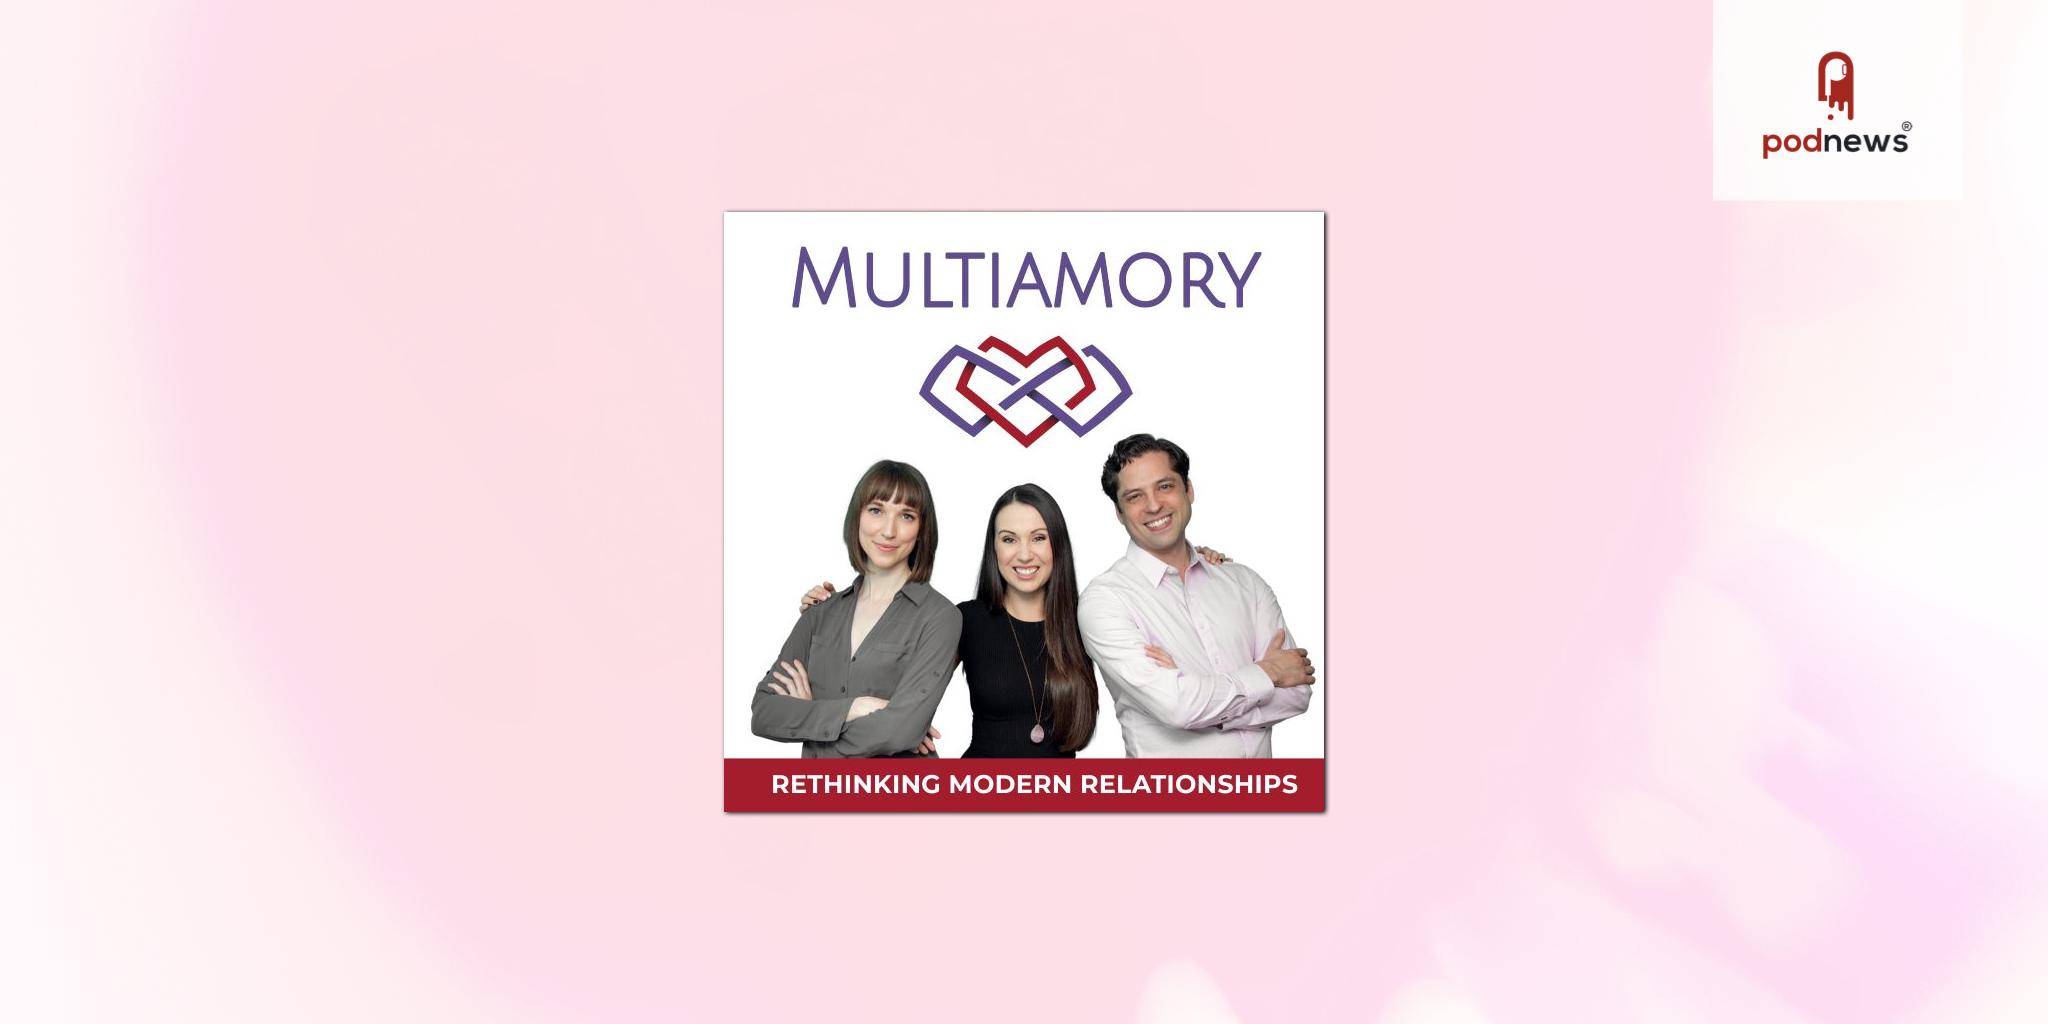 Revolutionary Non-Monogamous Relationship Podcast Releases 400th Episode, Celebrates  Upcoming Book Deal